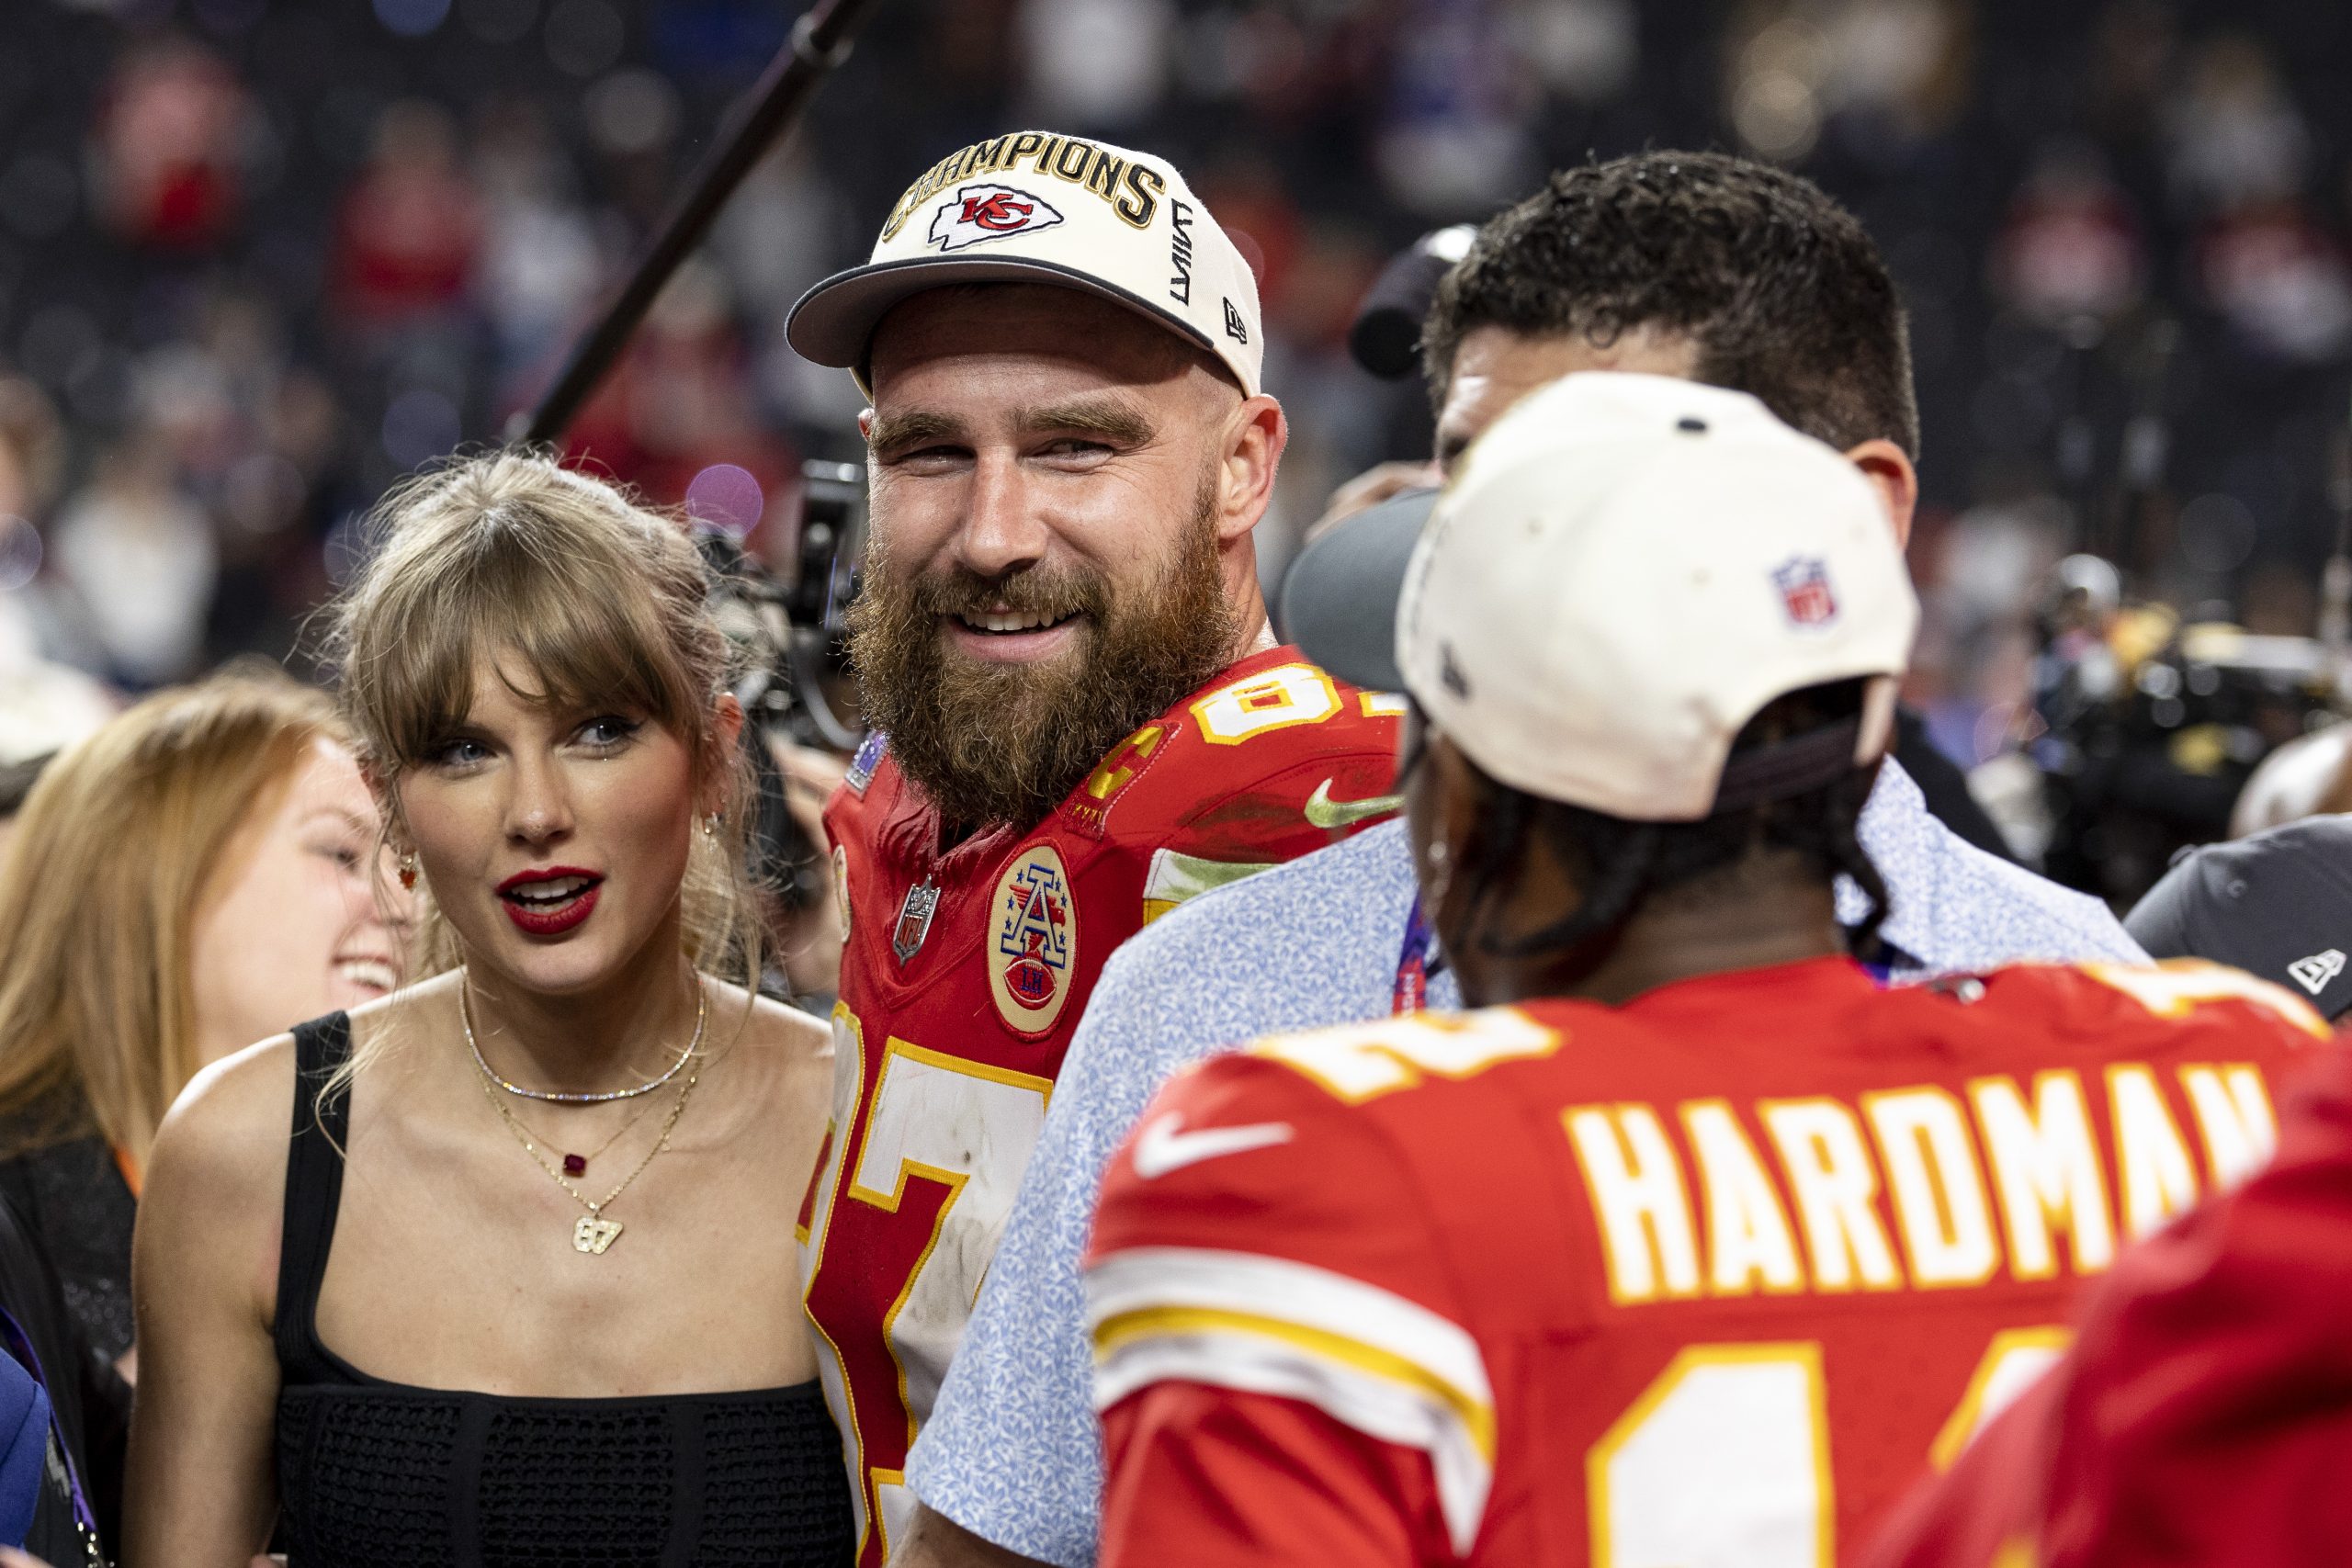 The loved-up pair were back in Vegas after Kelce's Super Bowl triumph in February